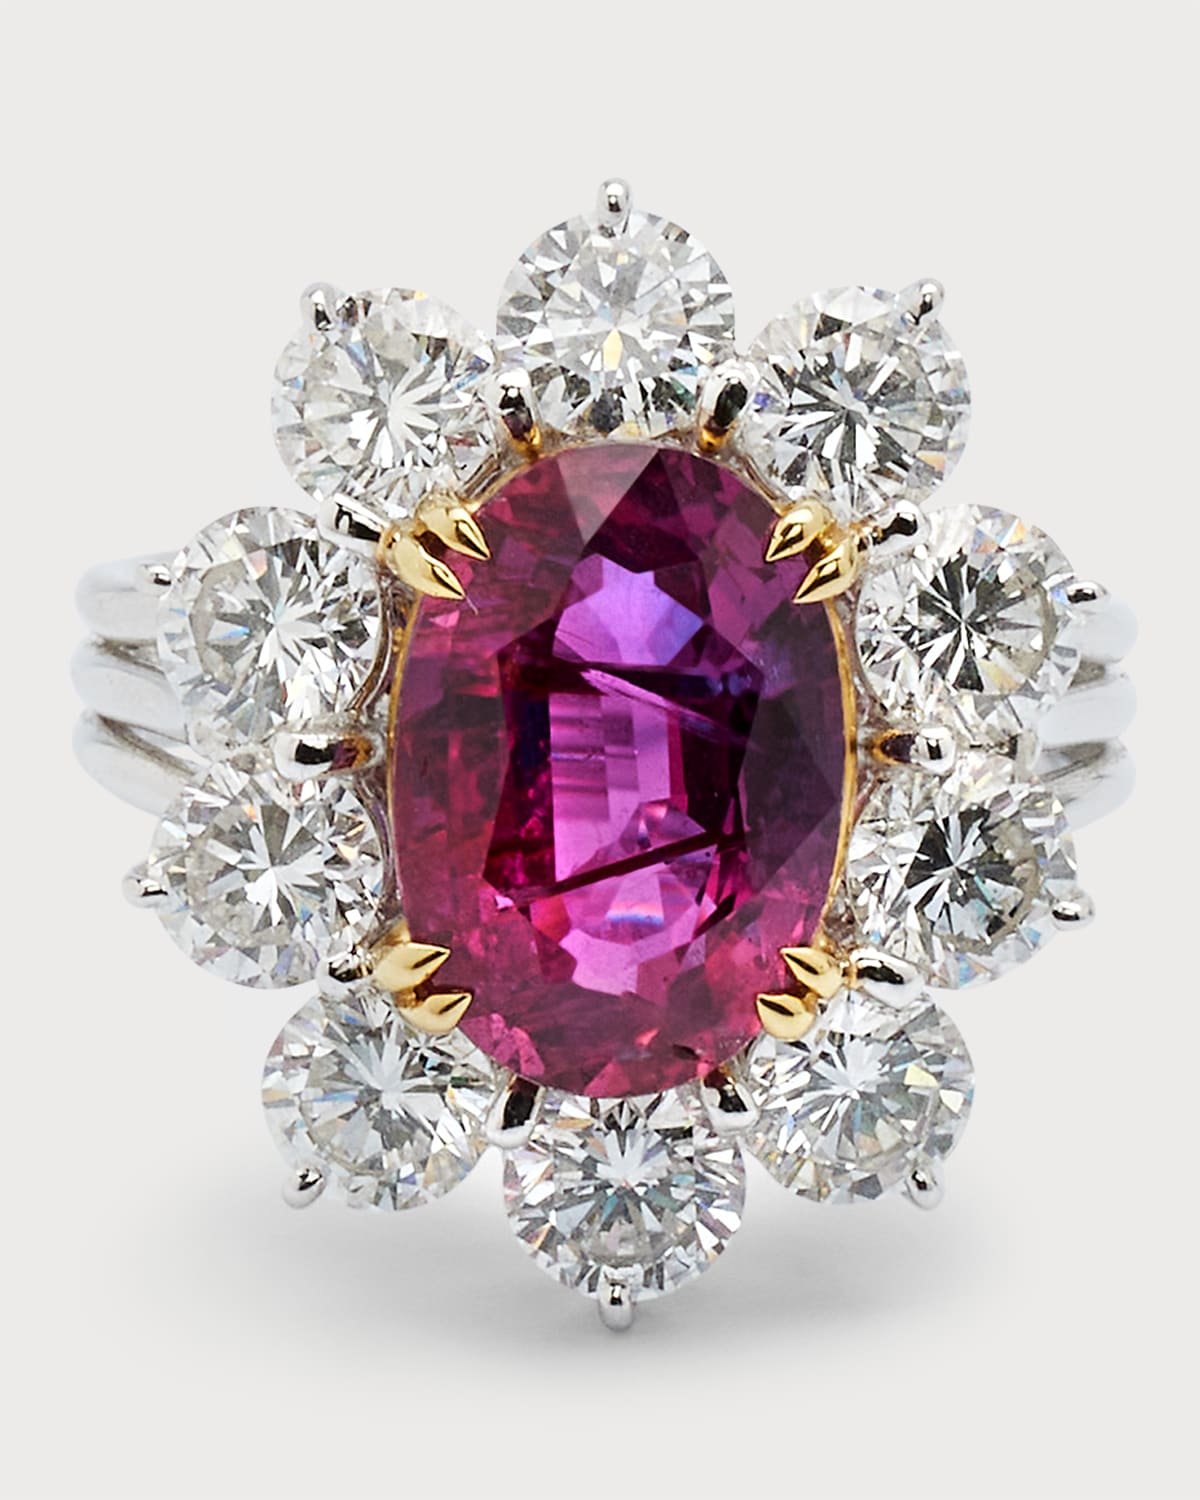 Alexander Laut 18K Gold Diamond and Ruby Ring, Size 5.75